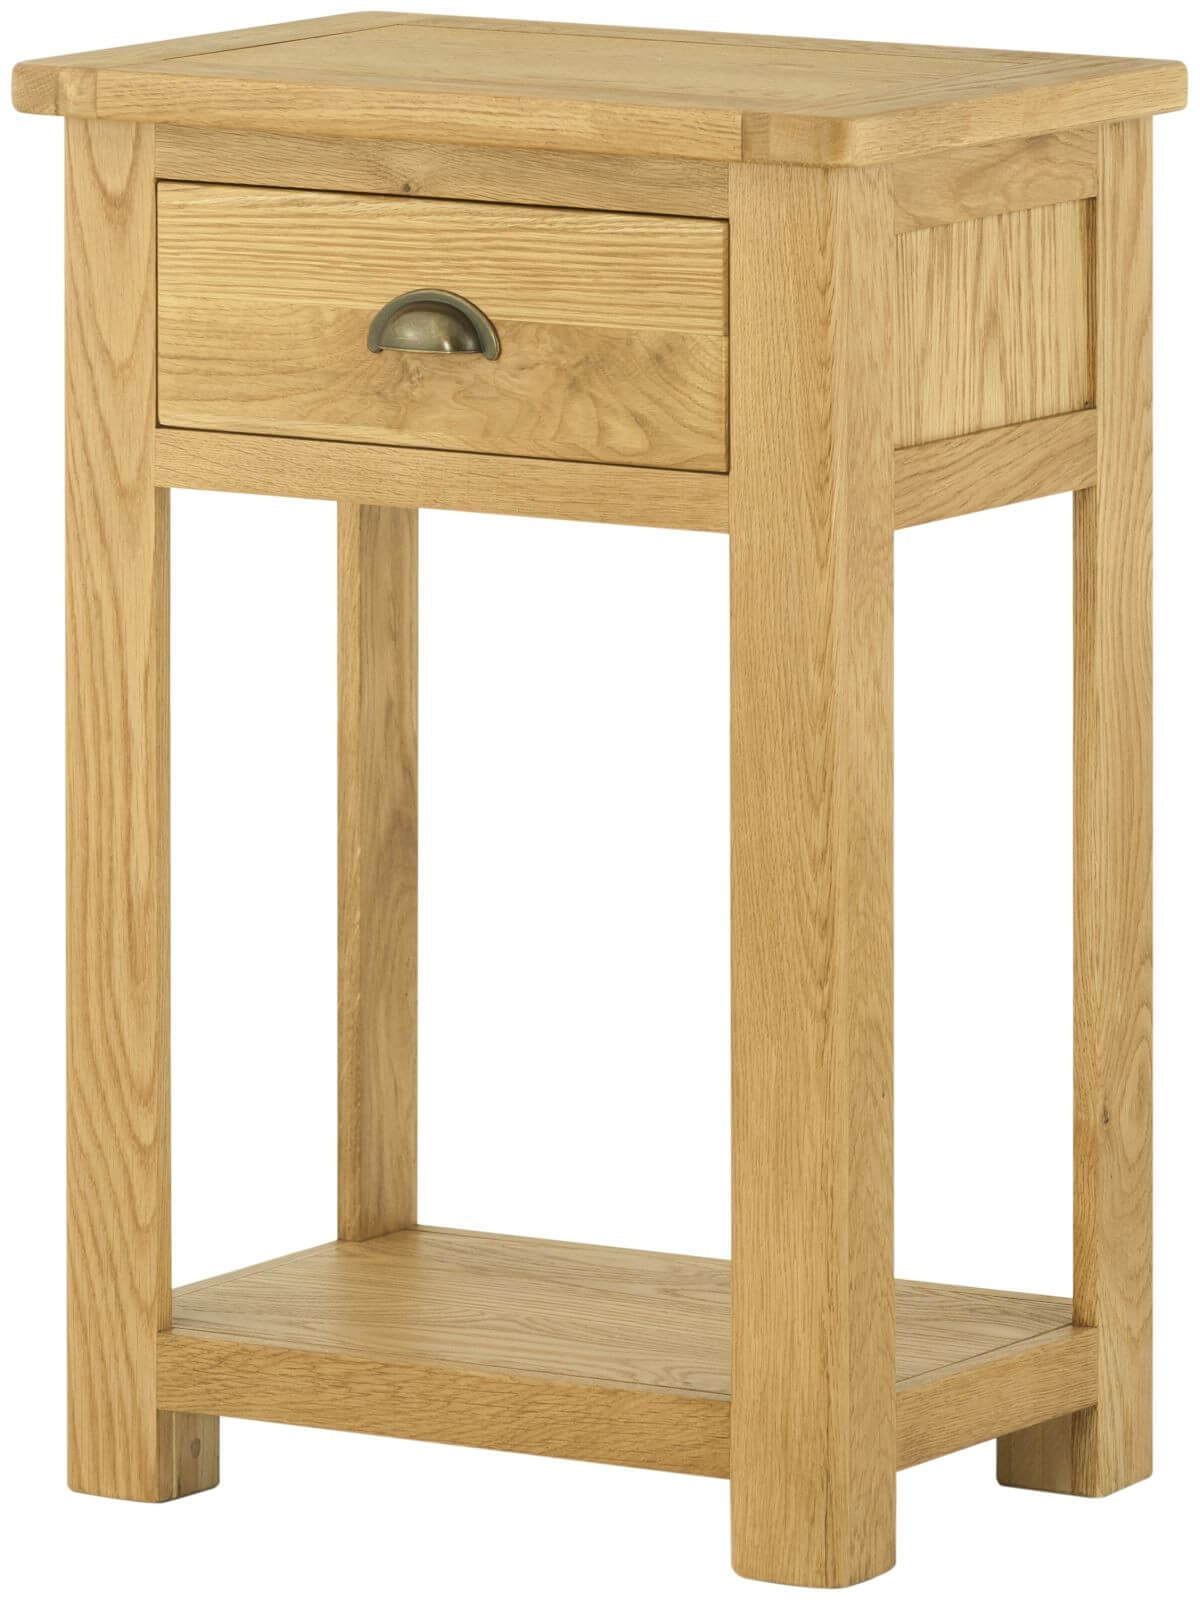 Showing image for Seattle console table - 1 drawer